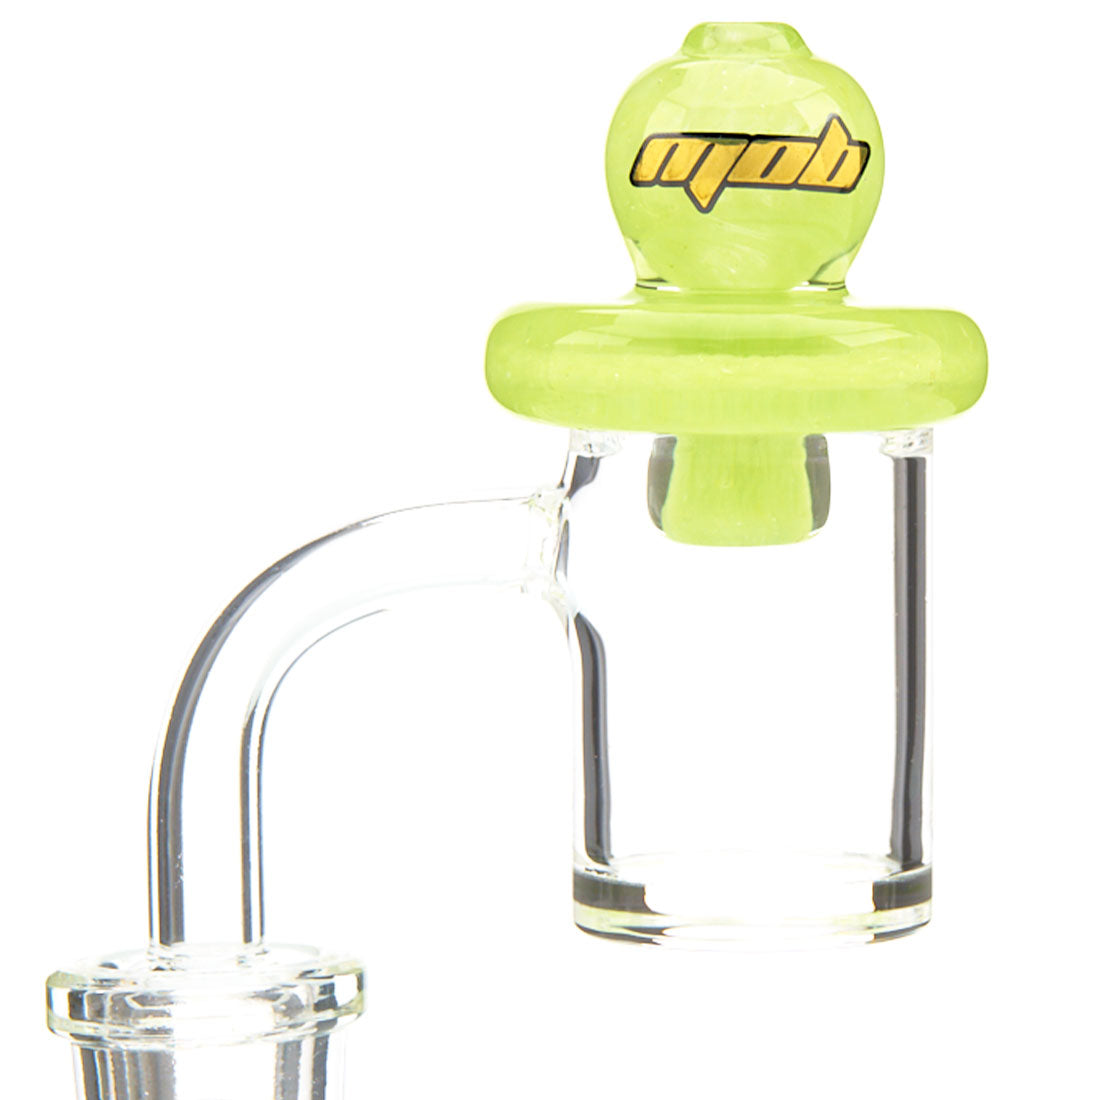 MOB Glass Double Threat Carb Cap